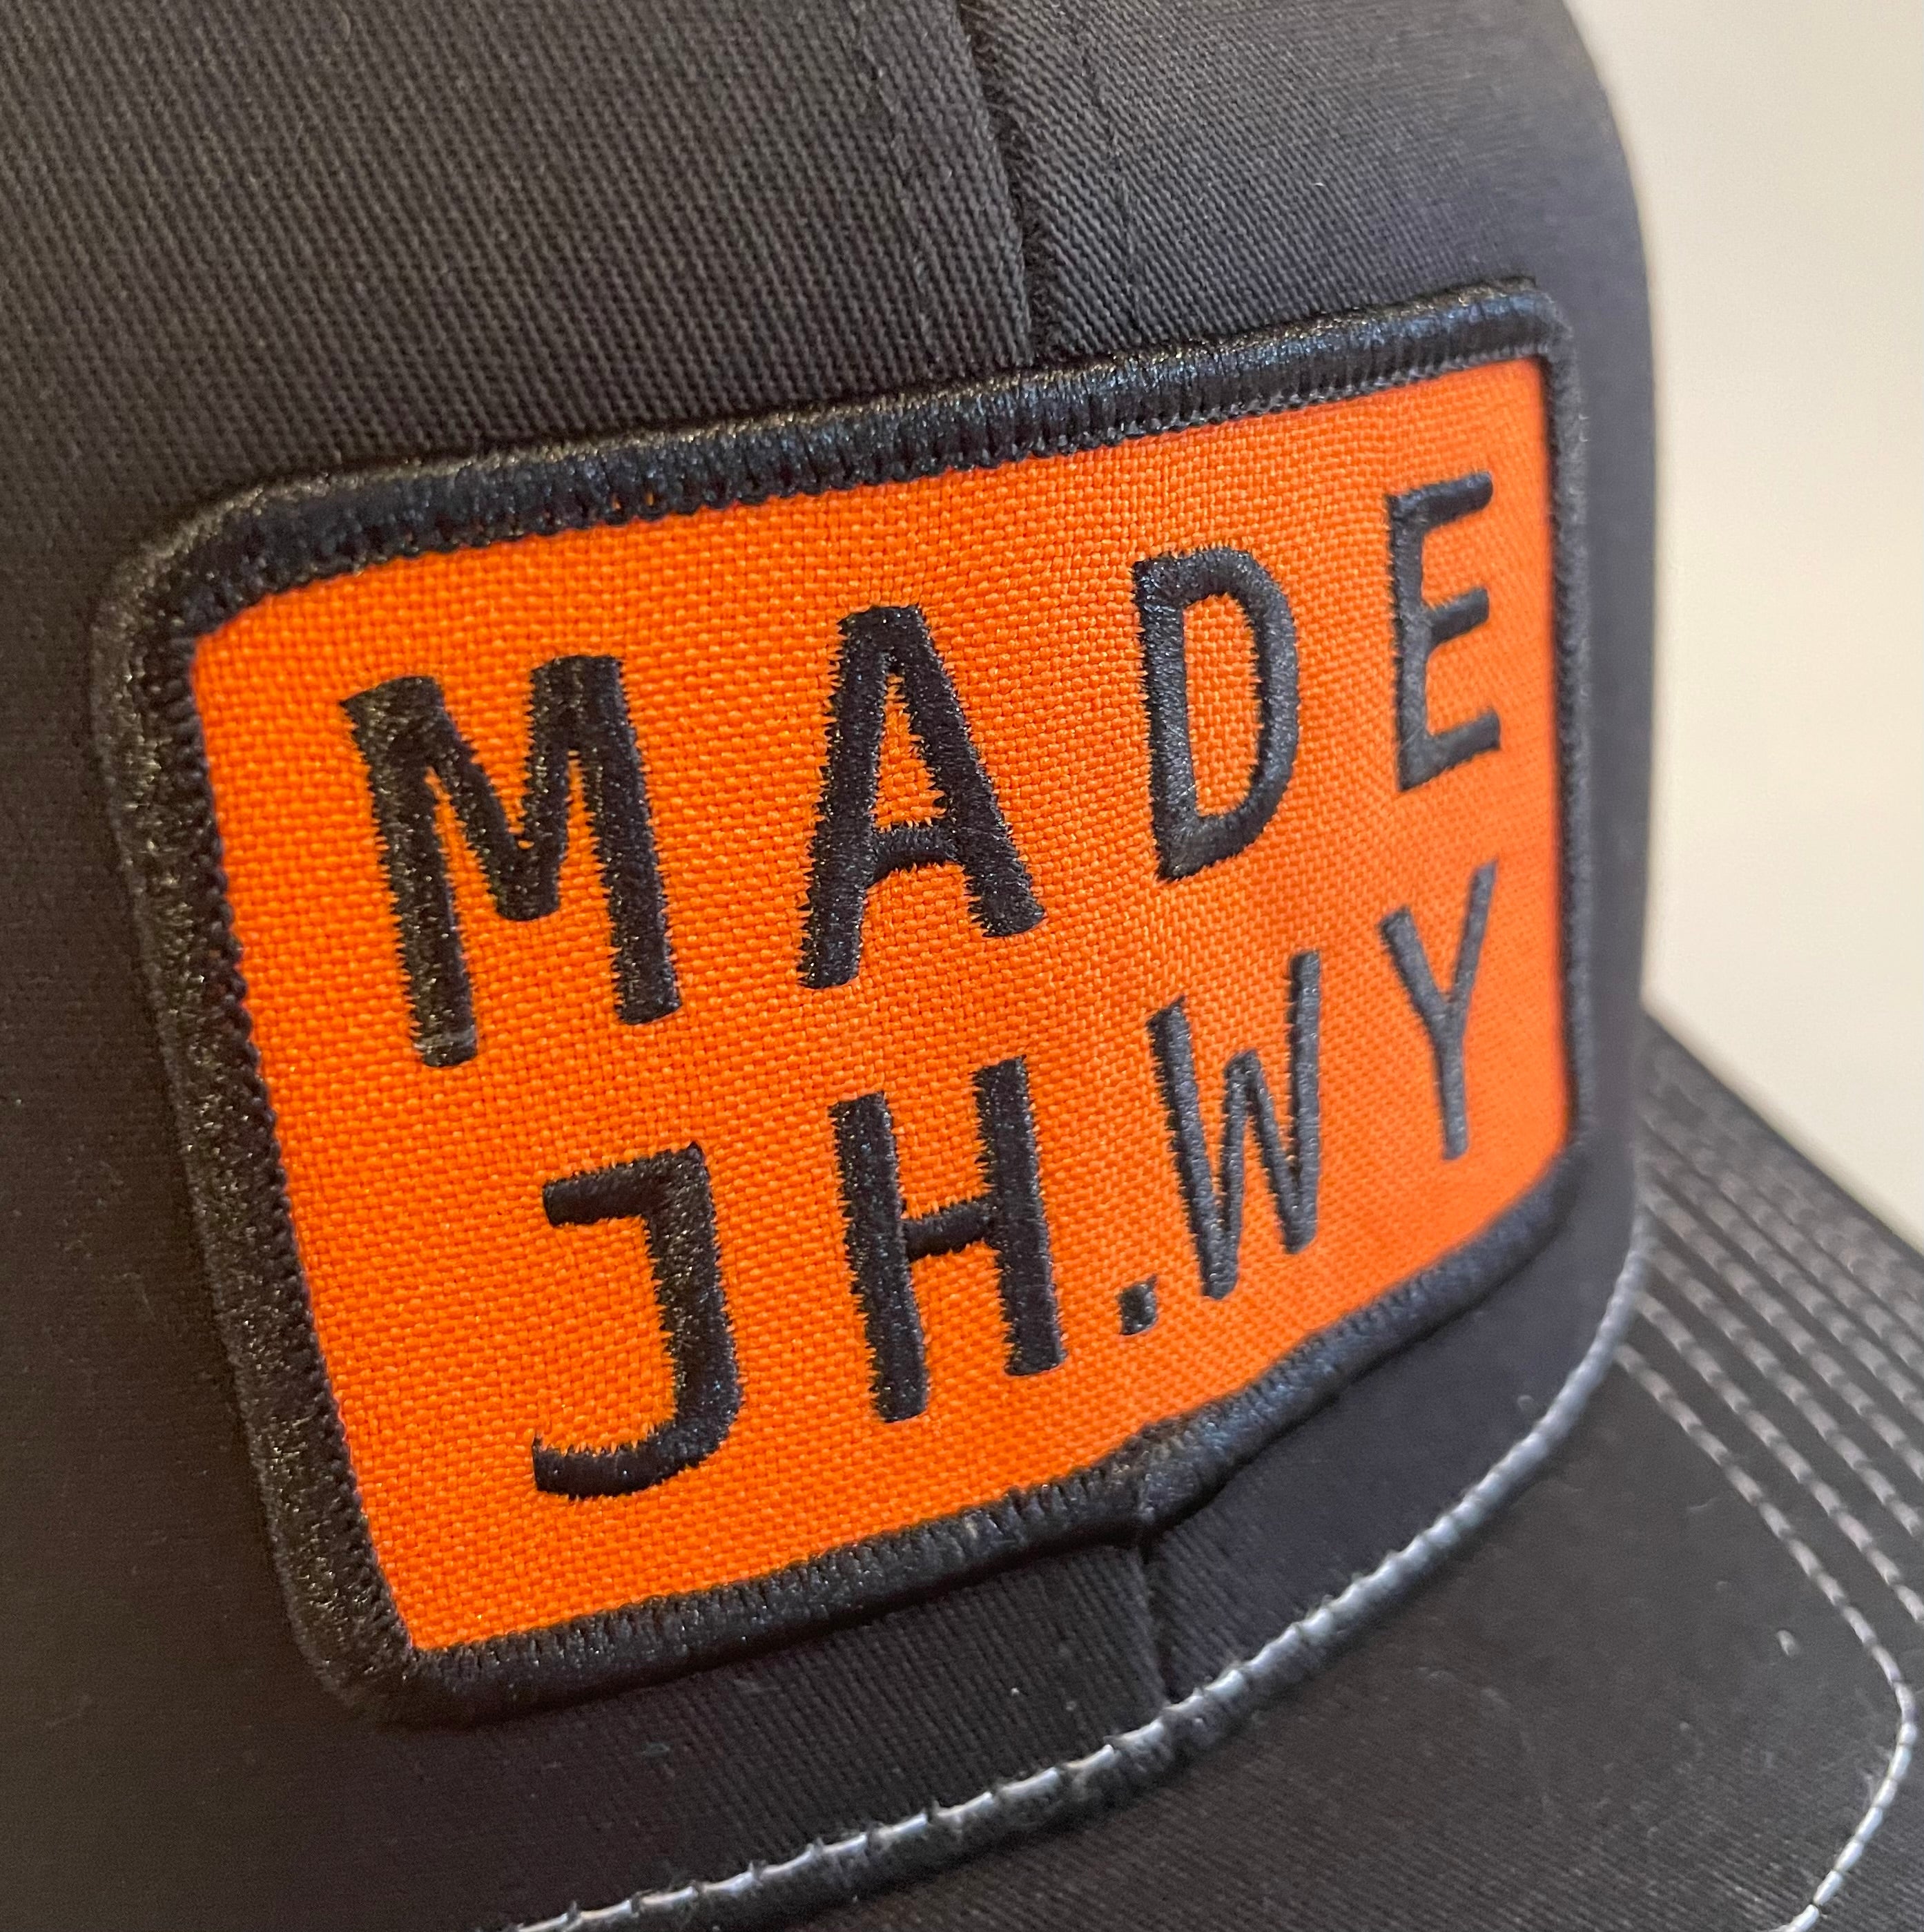 Black and White Mesh MADE JH.WY Trucker Hat